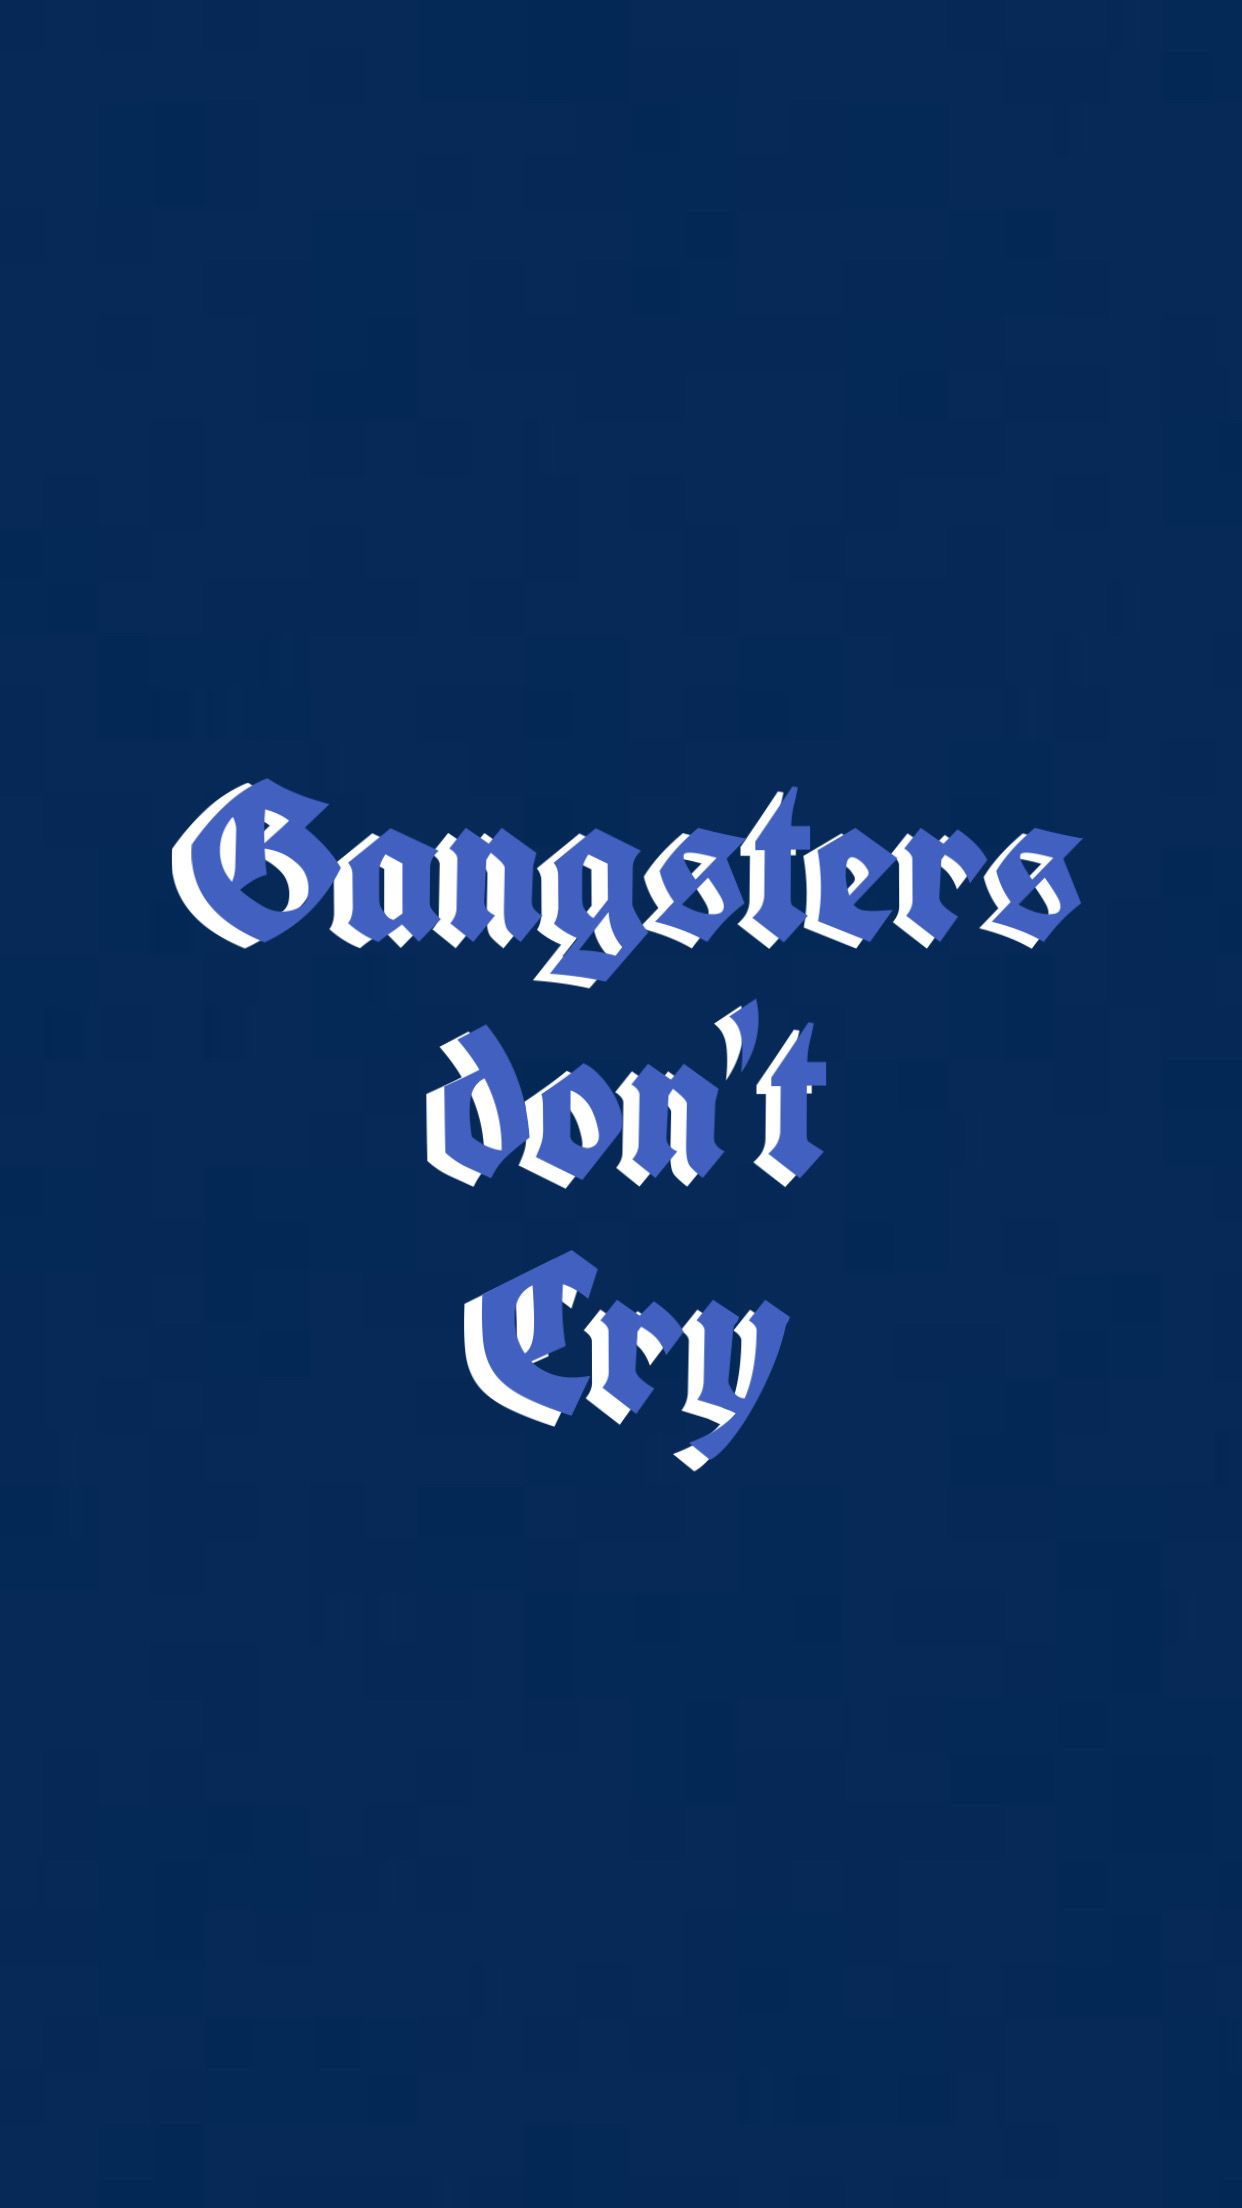 Gangsters don't cry wallpaper by your place to space - Navy blue, indigo, dark blue